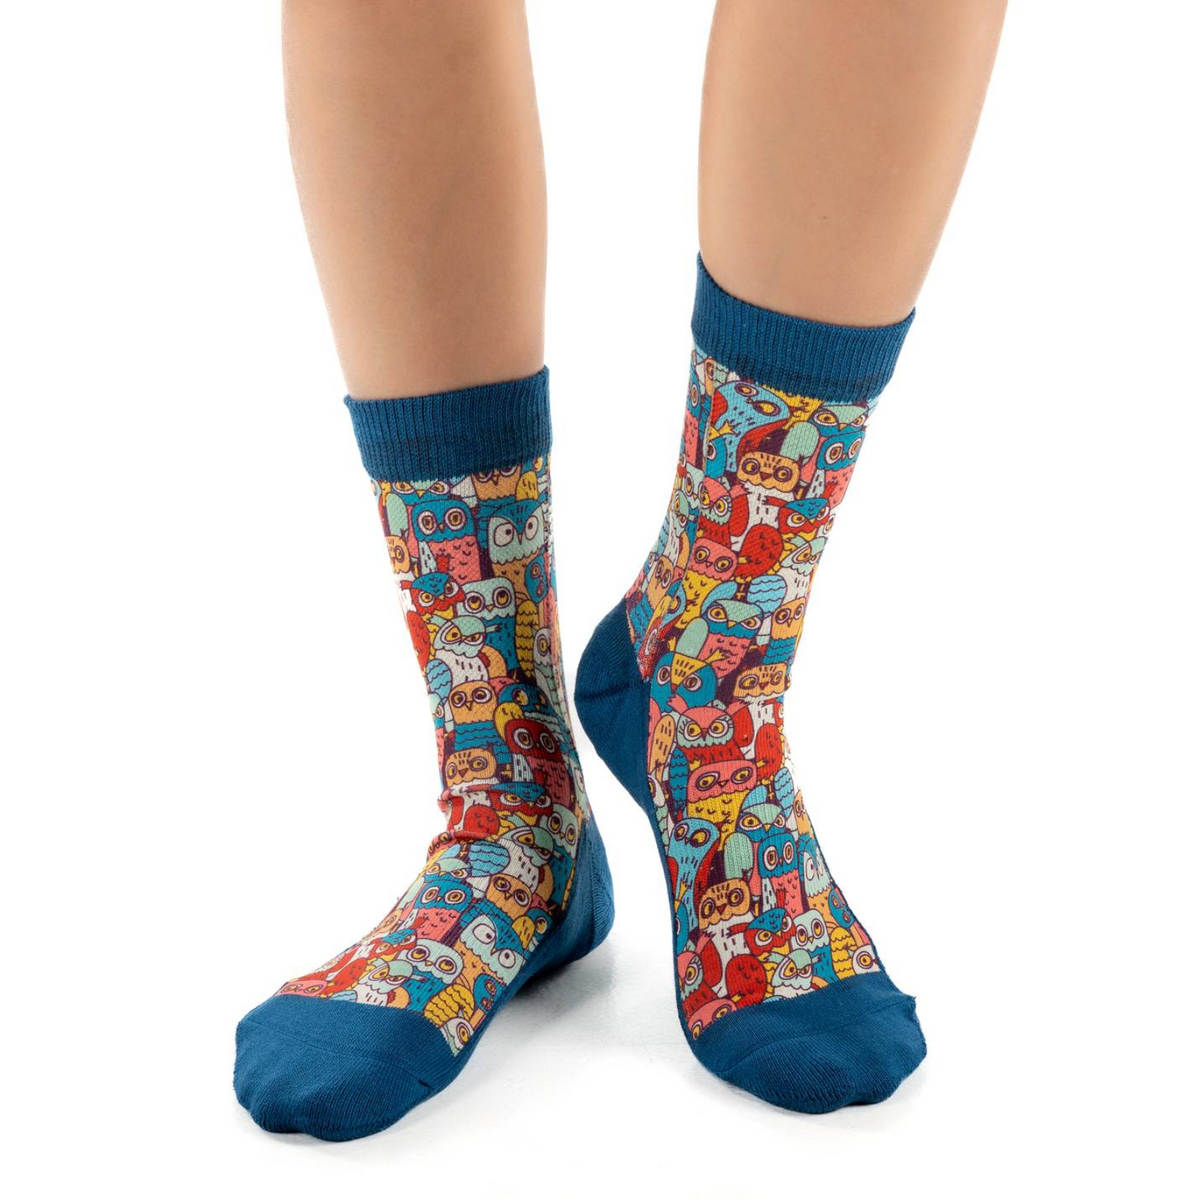 Good Luck Sock Funny Owls women&#39;s sock featuring blue cuff, toe, and heel with cartoon owls all over worn by model